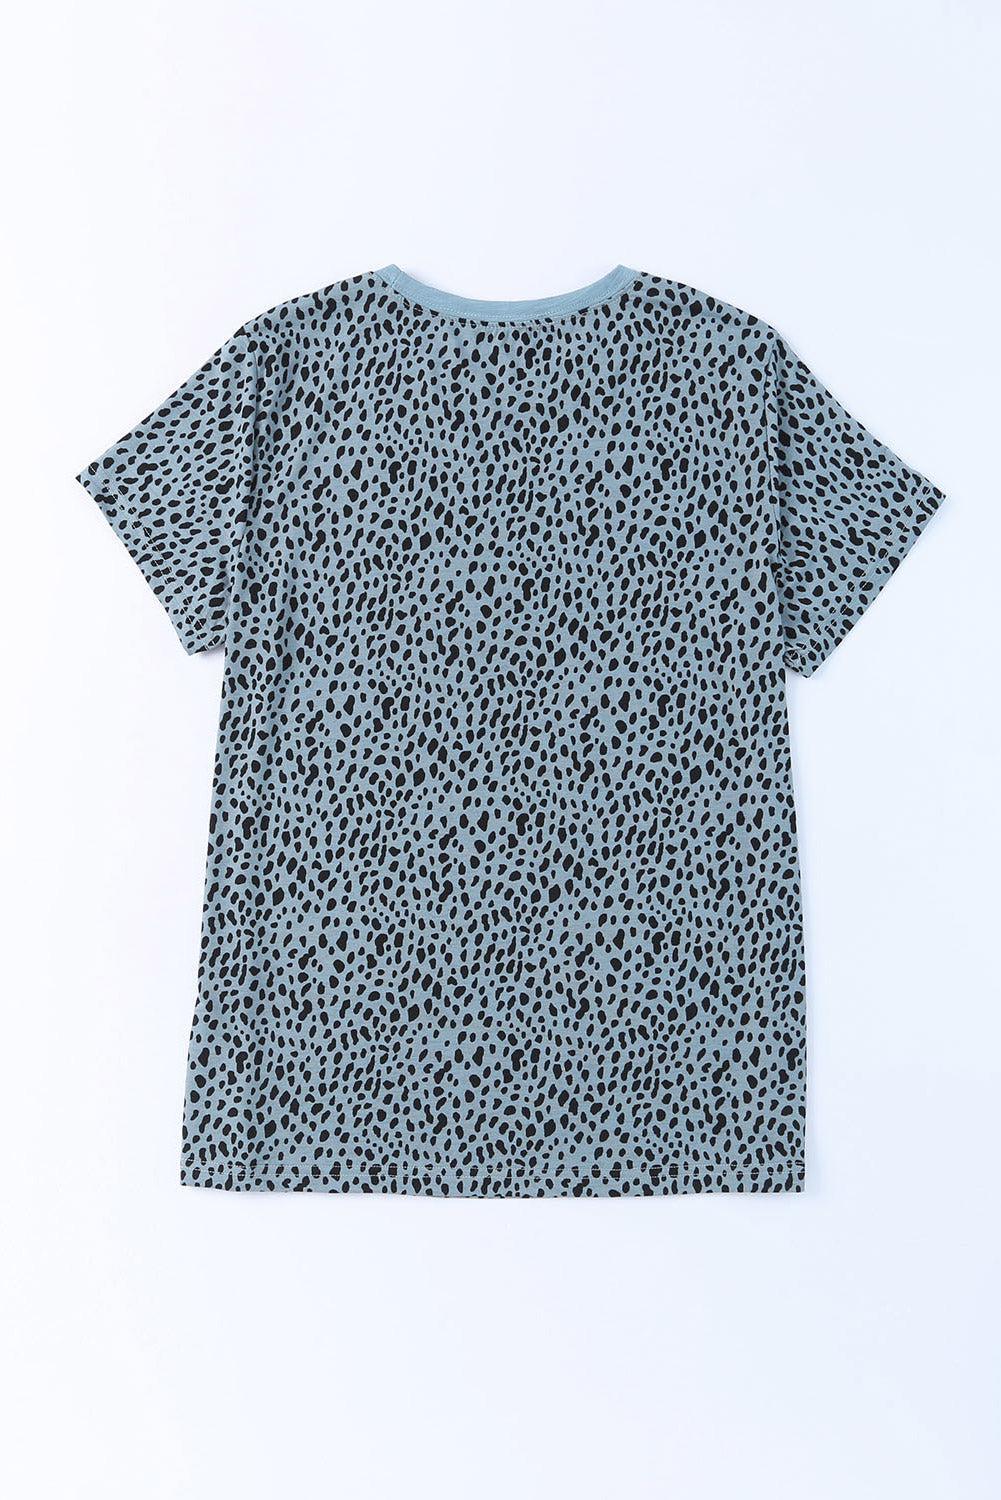 a t - shirt with a black and white animal print